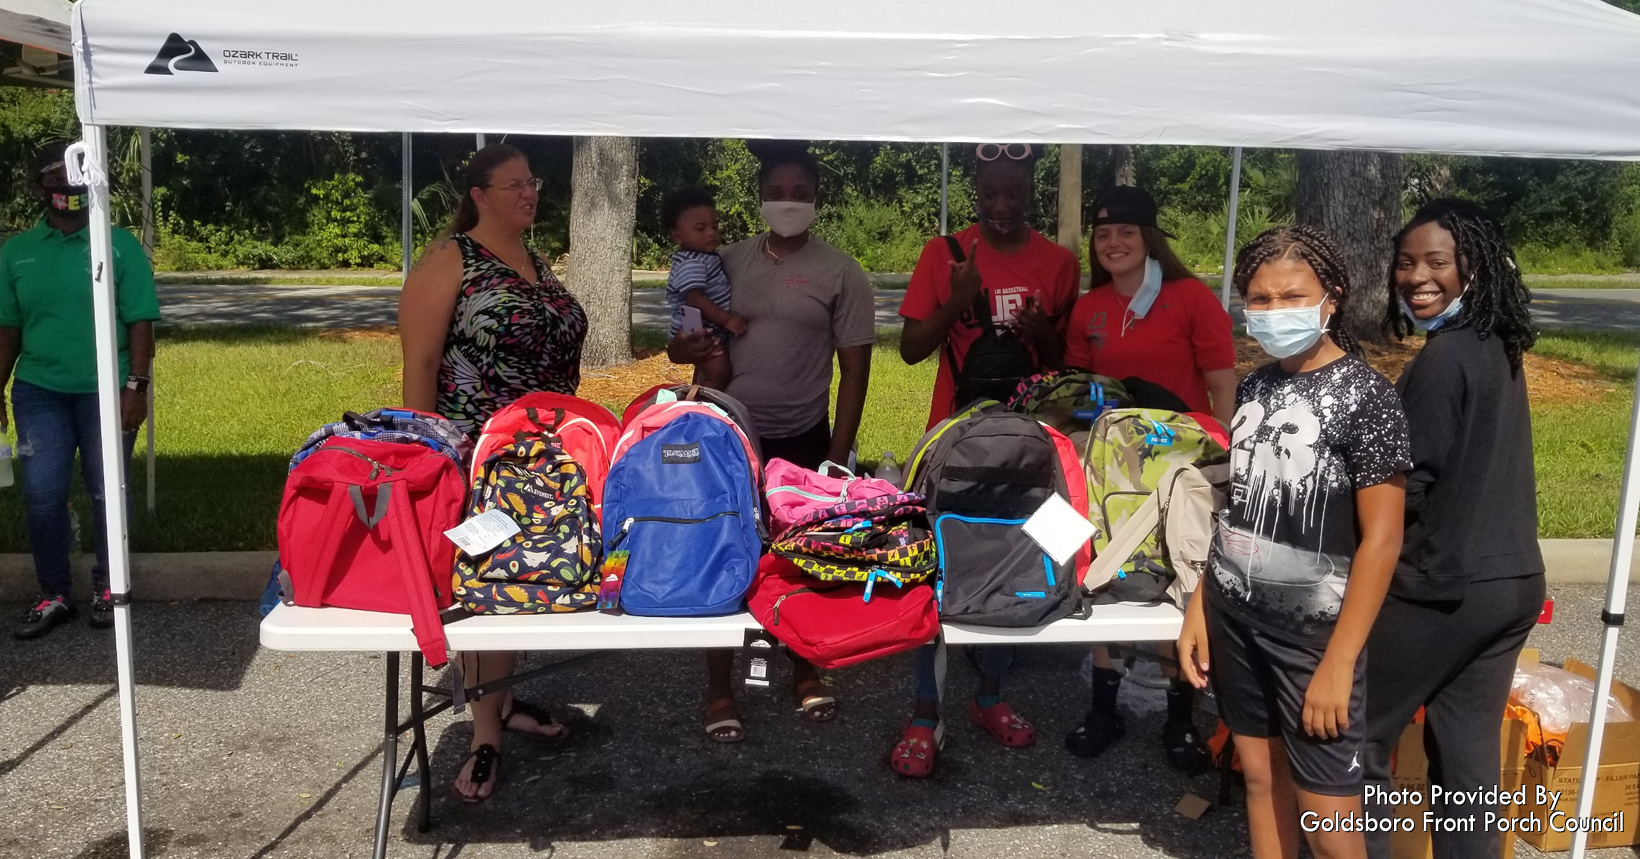 With the help from the sheriff’s office and other community service organizations, the Goldsboro Front Porch held a Back-to-School backpack giveaway. The event served as a way to alleviate stress on parents when it comes to getting a back pack.